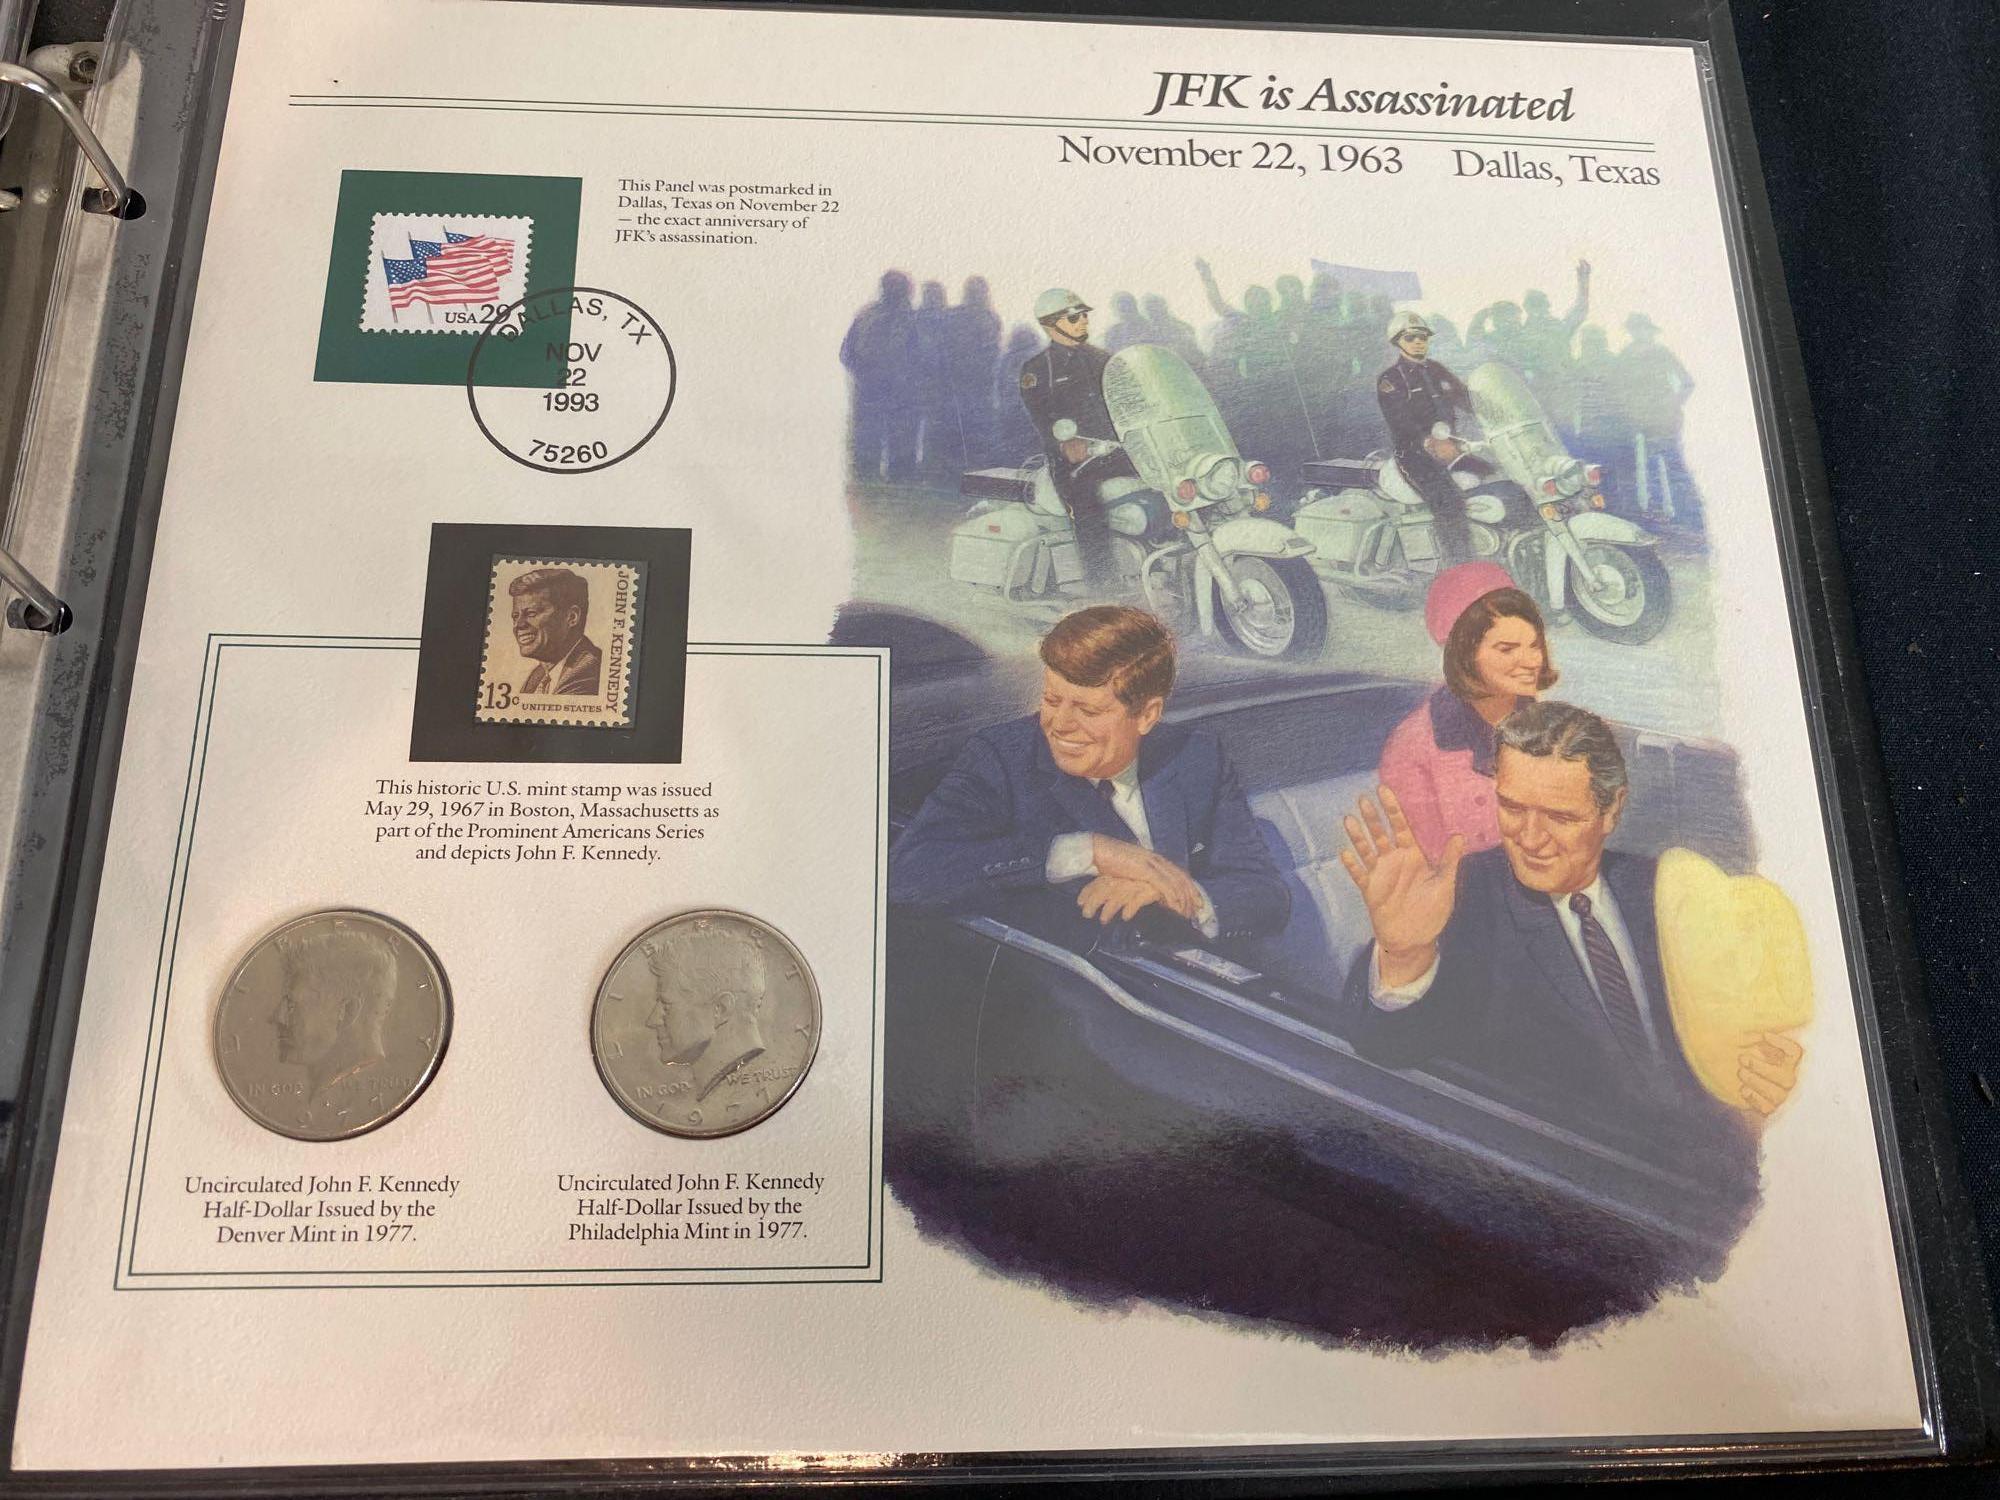 The Complete John F. Kennedy Uncirculated U.S. Half-Dollar Collection